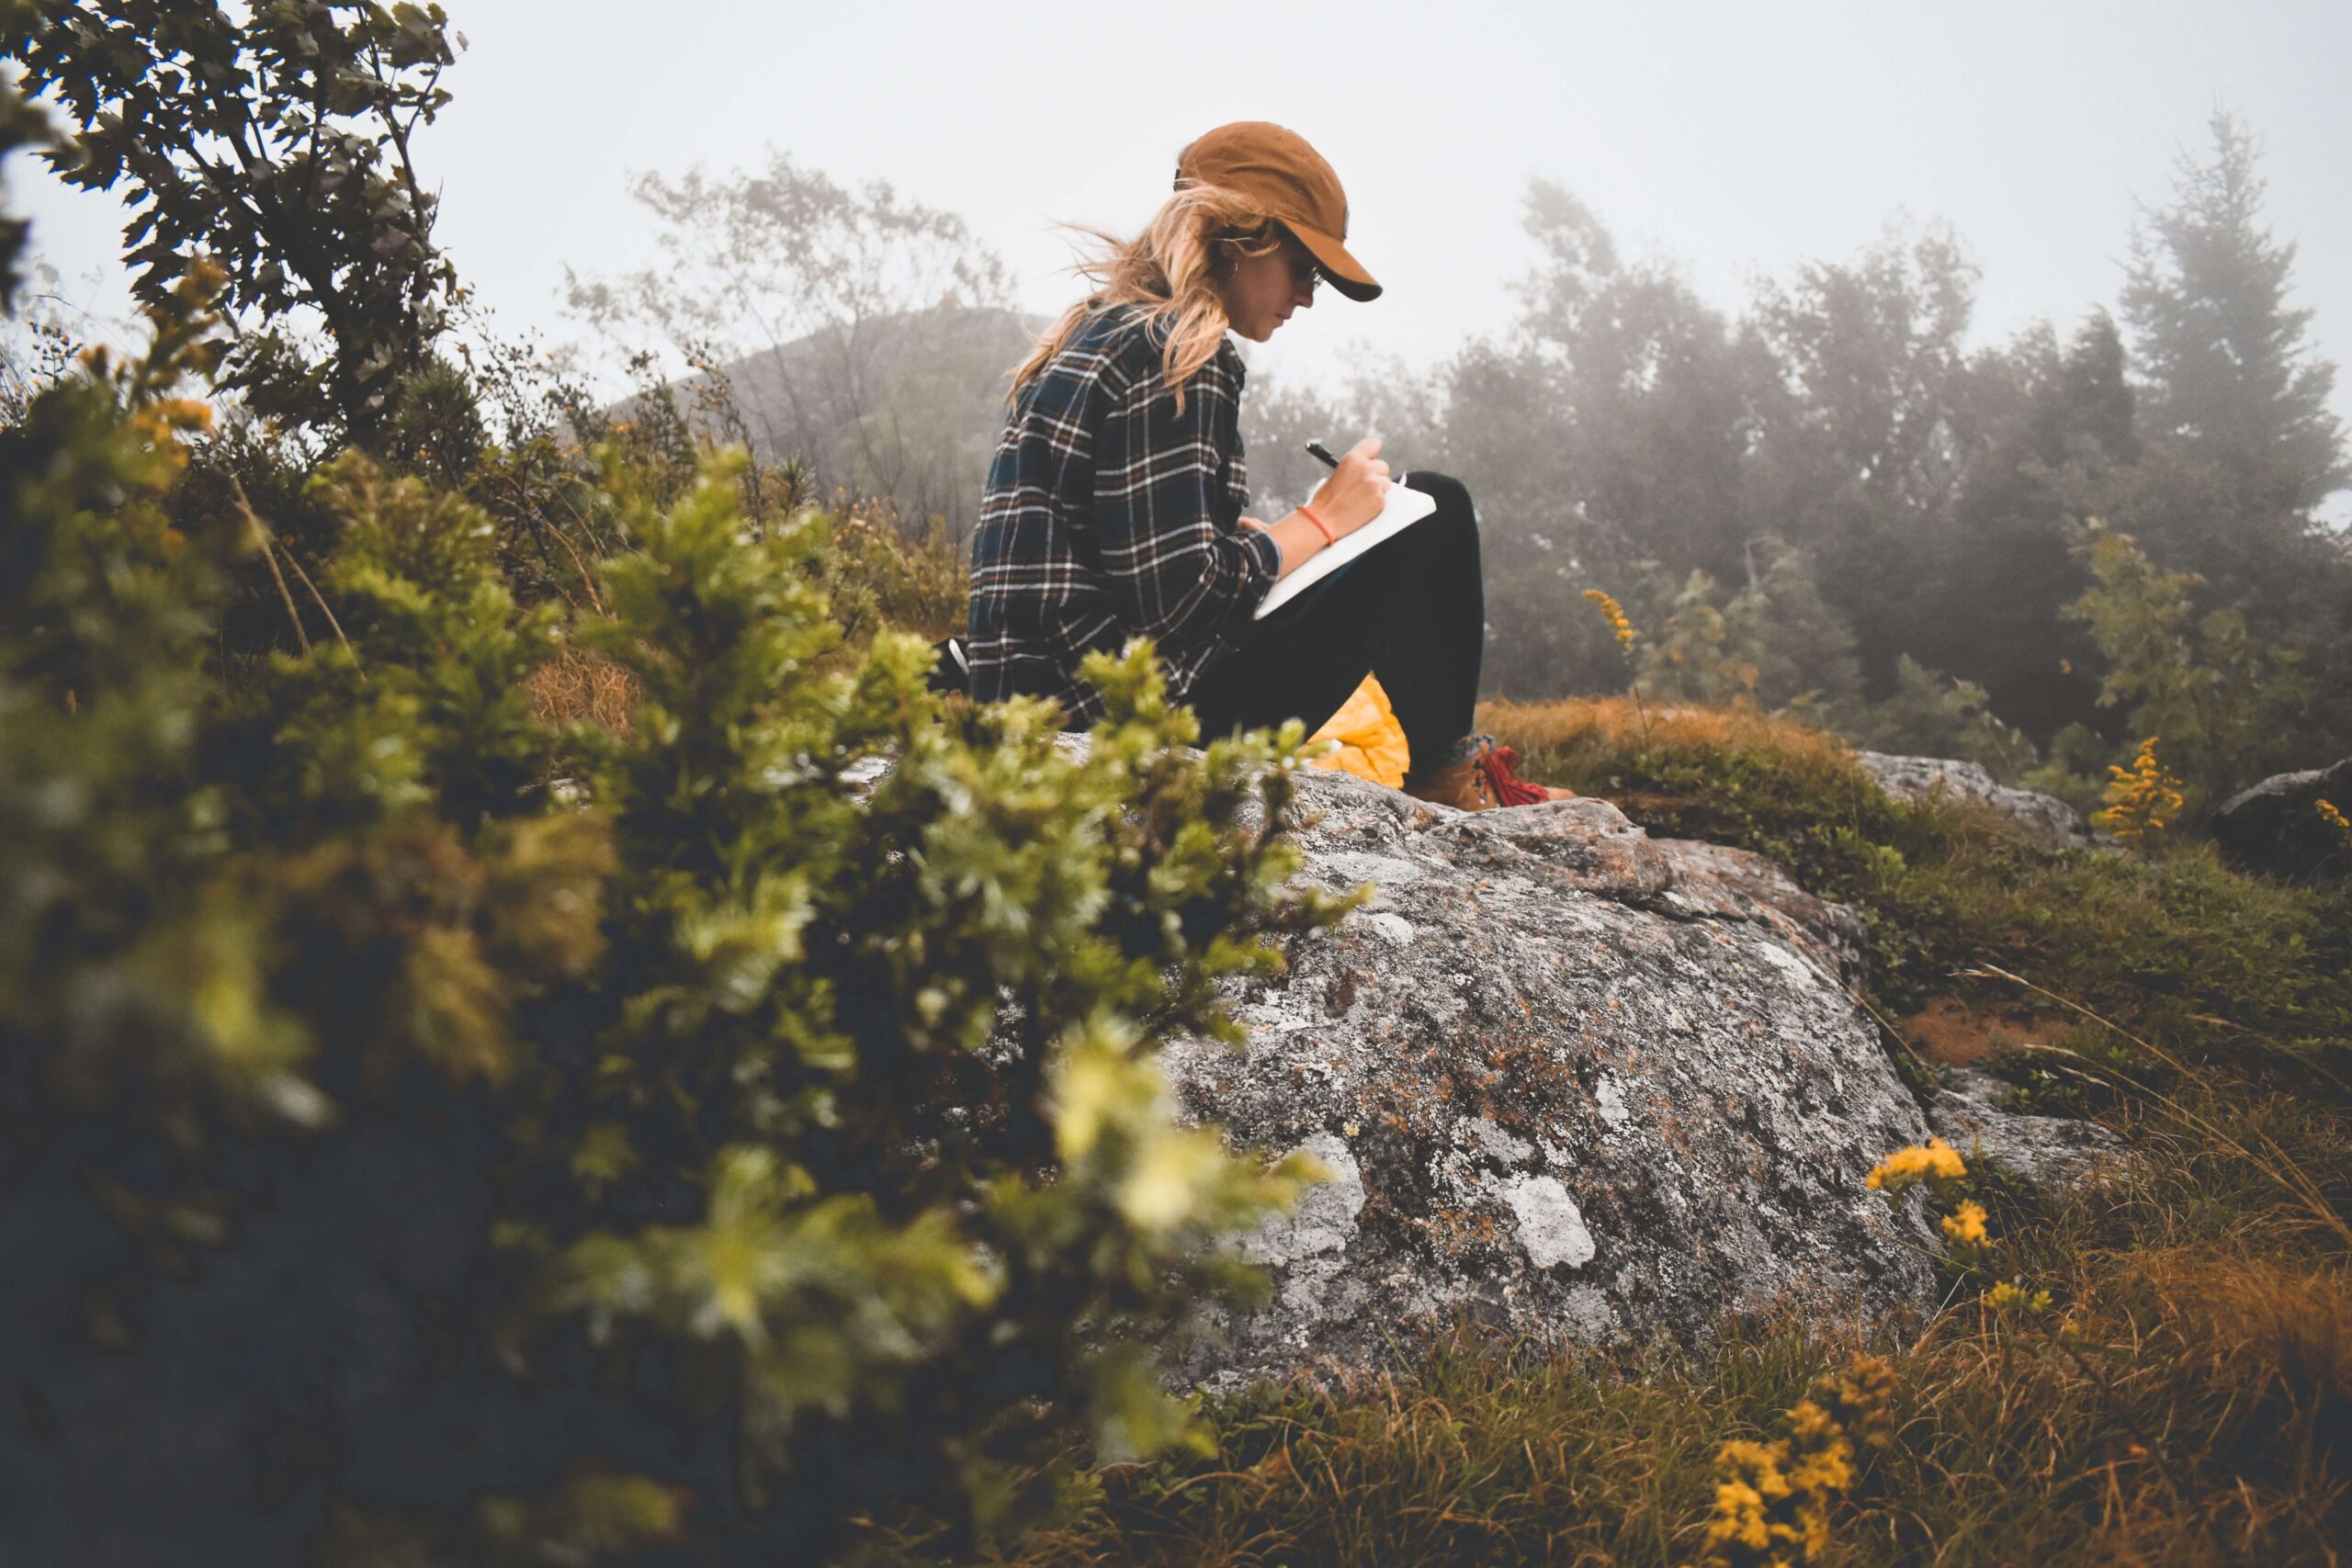 woman sitting on a rock on a hilltop journaling. she is wearing a mustard colored ball cap, plaid flannel shirt, black leggings, and brown hiking shoes with red laces. side profile view